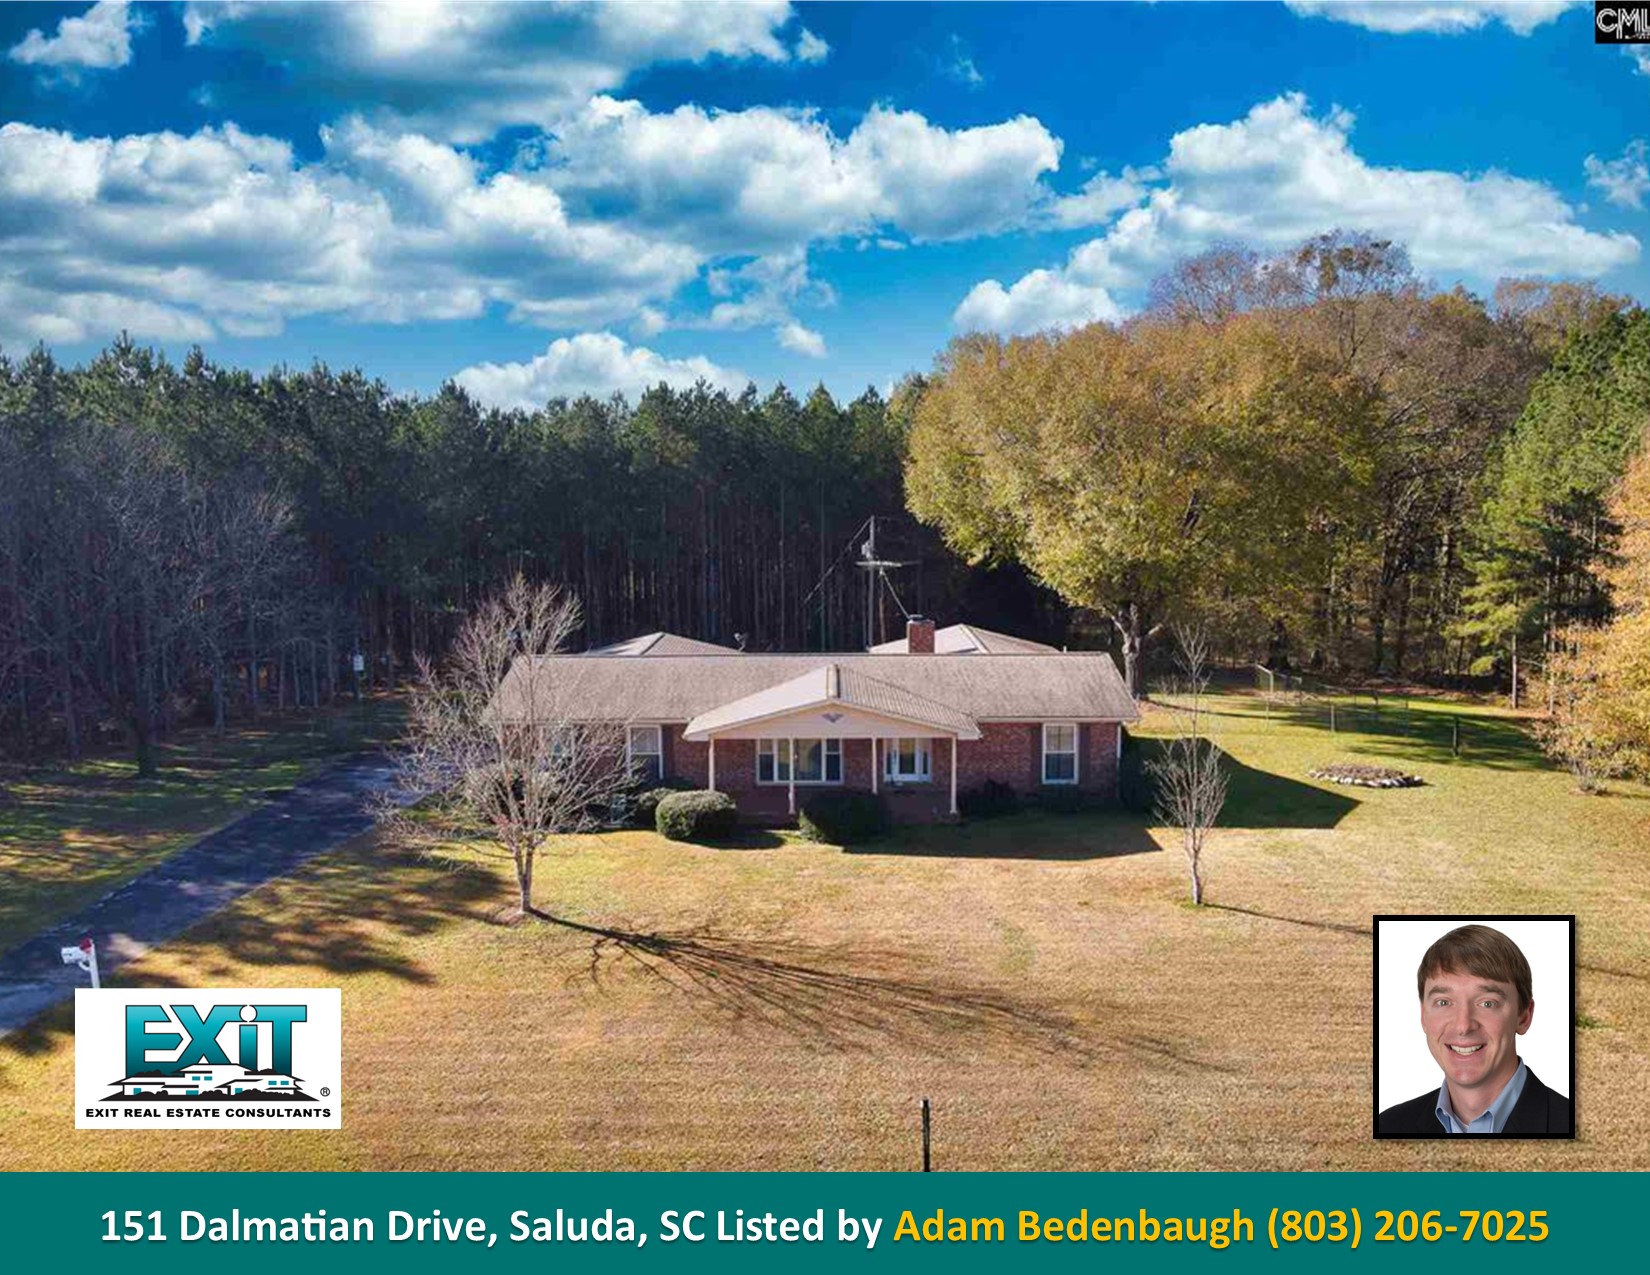 Just listed in Saluda